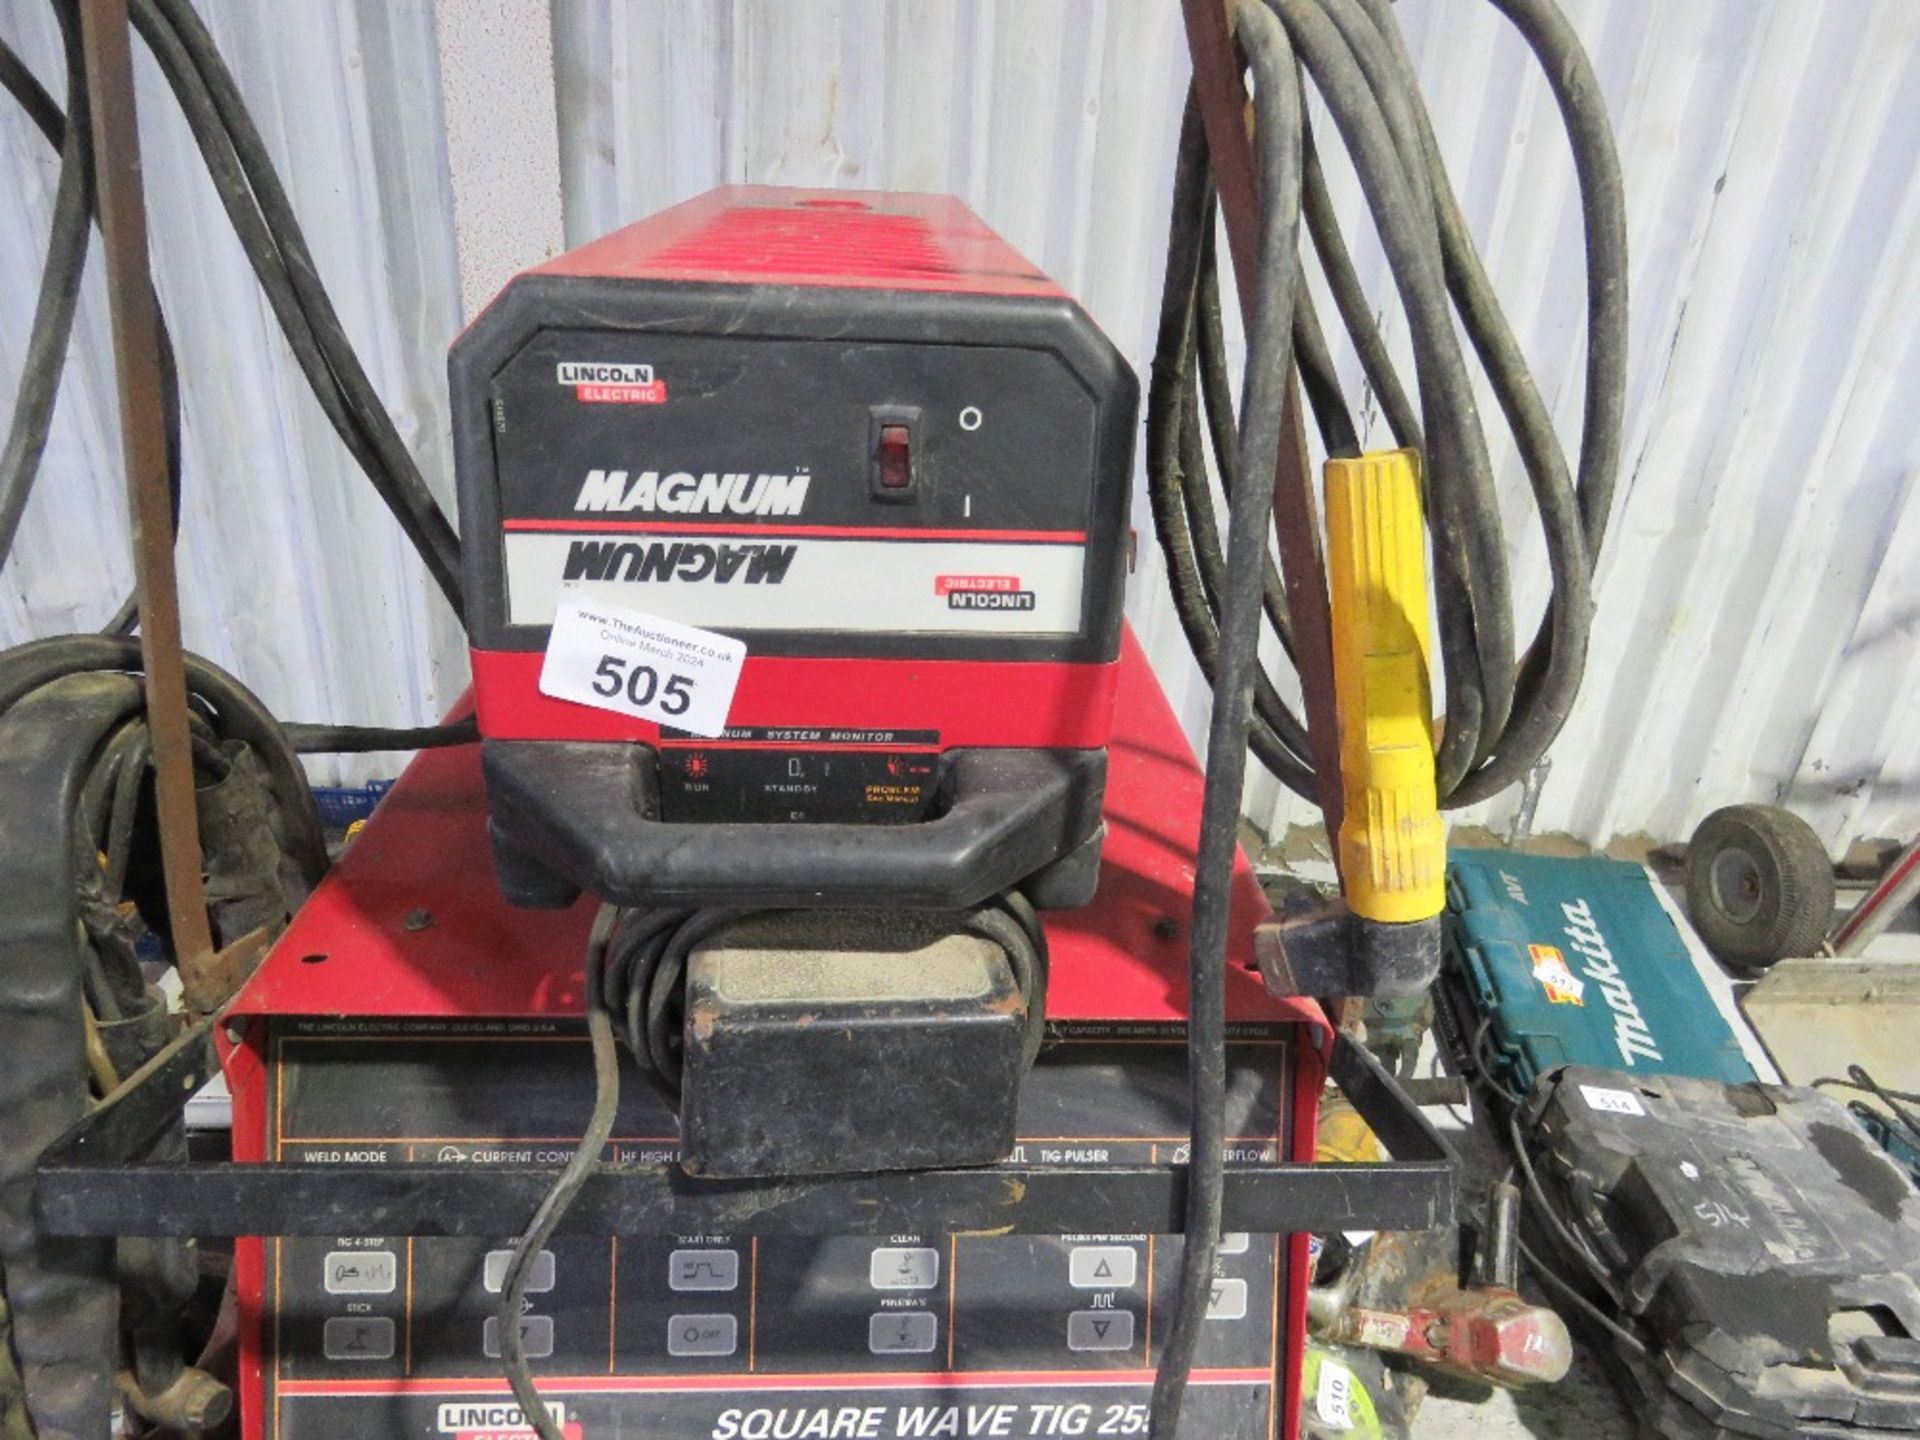 LINCOLN SQUARE WAVE TIG255 WELDER WITH MAGNUM UNIT, 3 PHASE. THIS LOT IS SOLD UNDER THE AUCTIONEE - Bild 4 aus 7